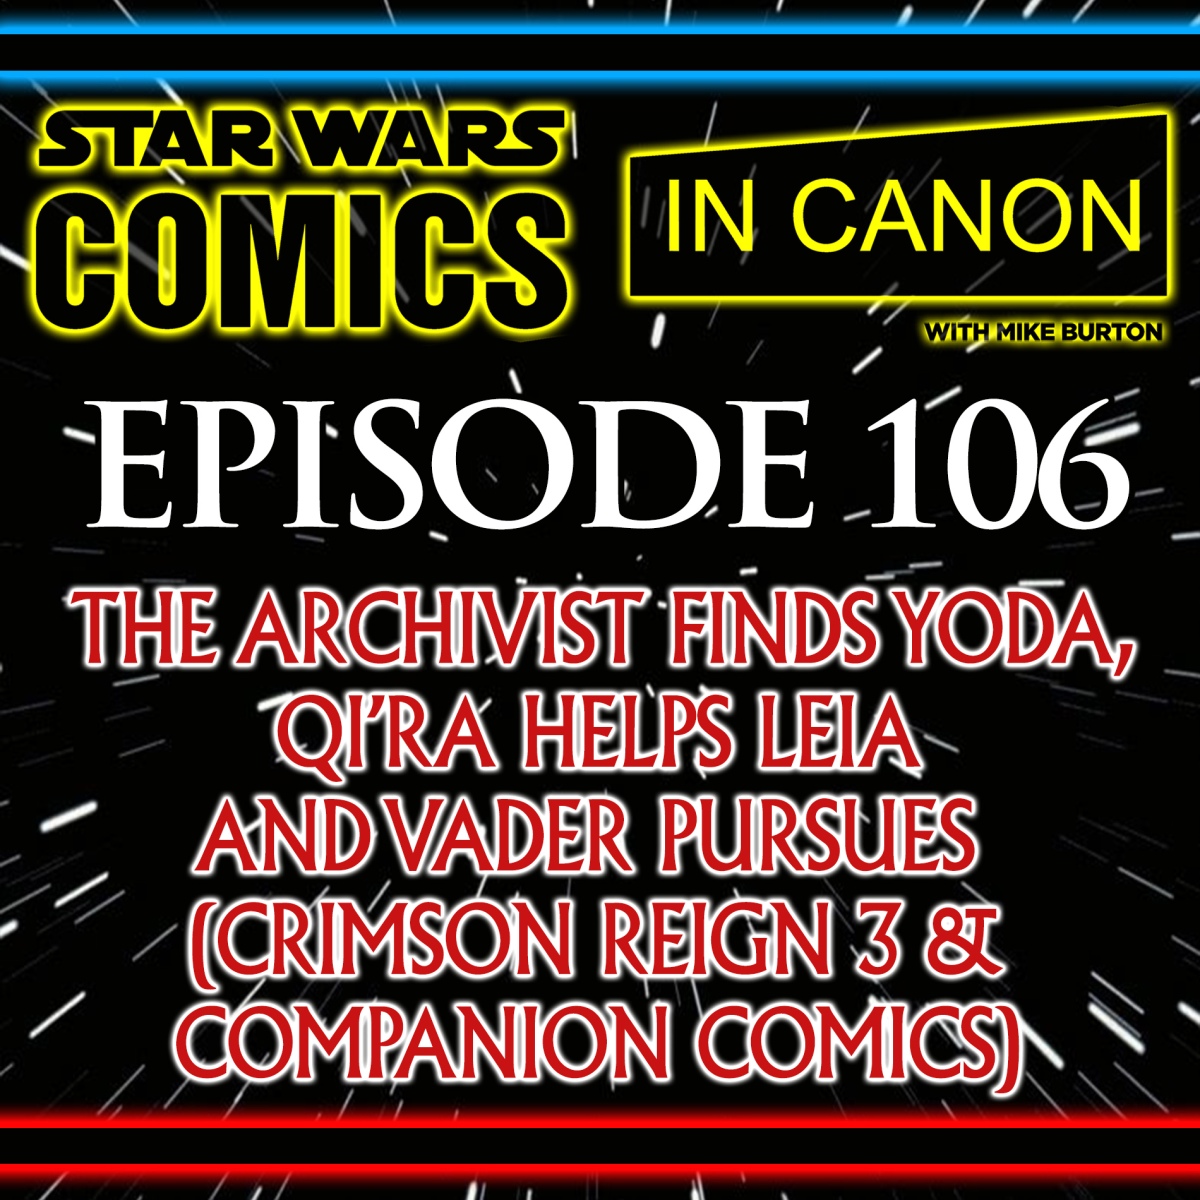 Star Wars: Comics In Canon – Crimson Reign 3: The Archivist Finds Yoda, Qi’ra Helps Leia And Vader Pursues Sabé – (CR3, DV21, Bounty Hunters 21, Doctor Aphra 19 & Star Wars 22) – Ep 106